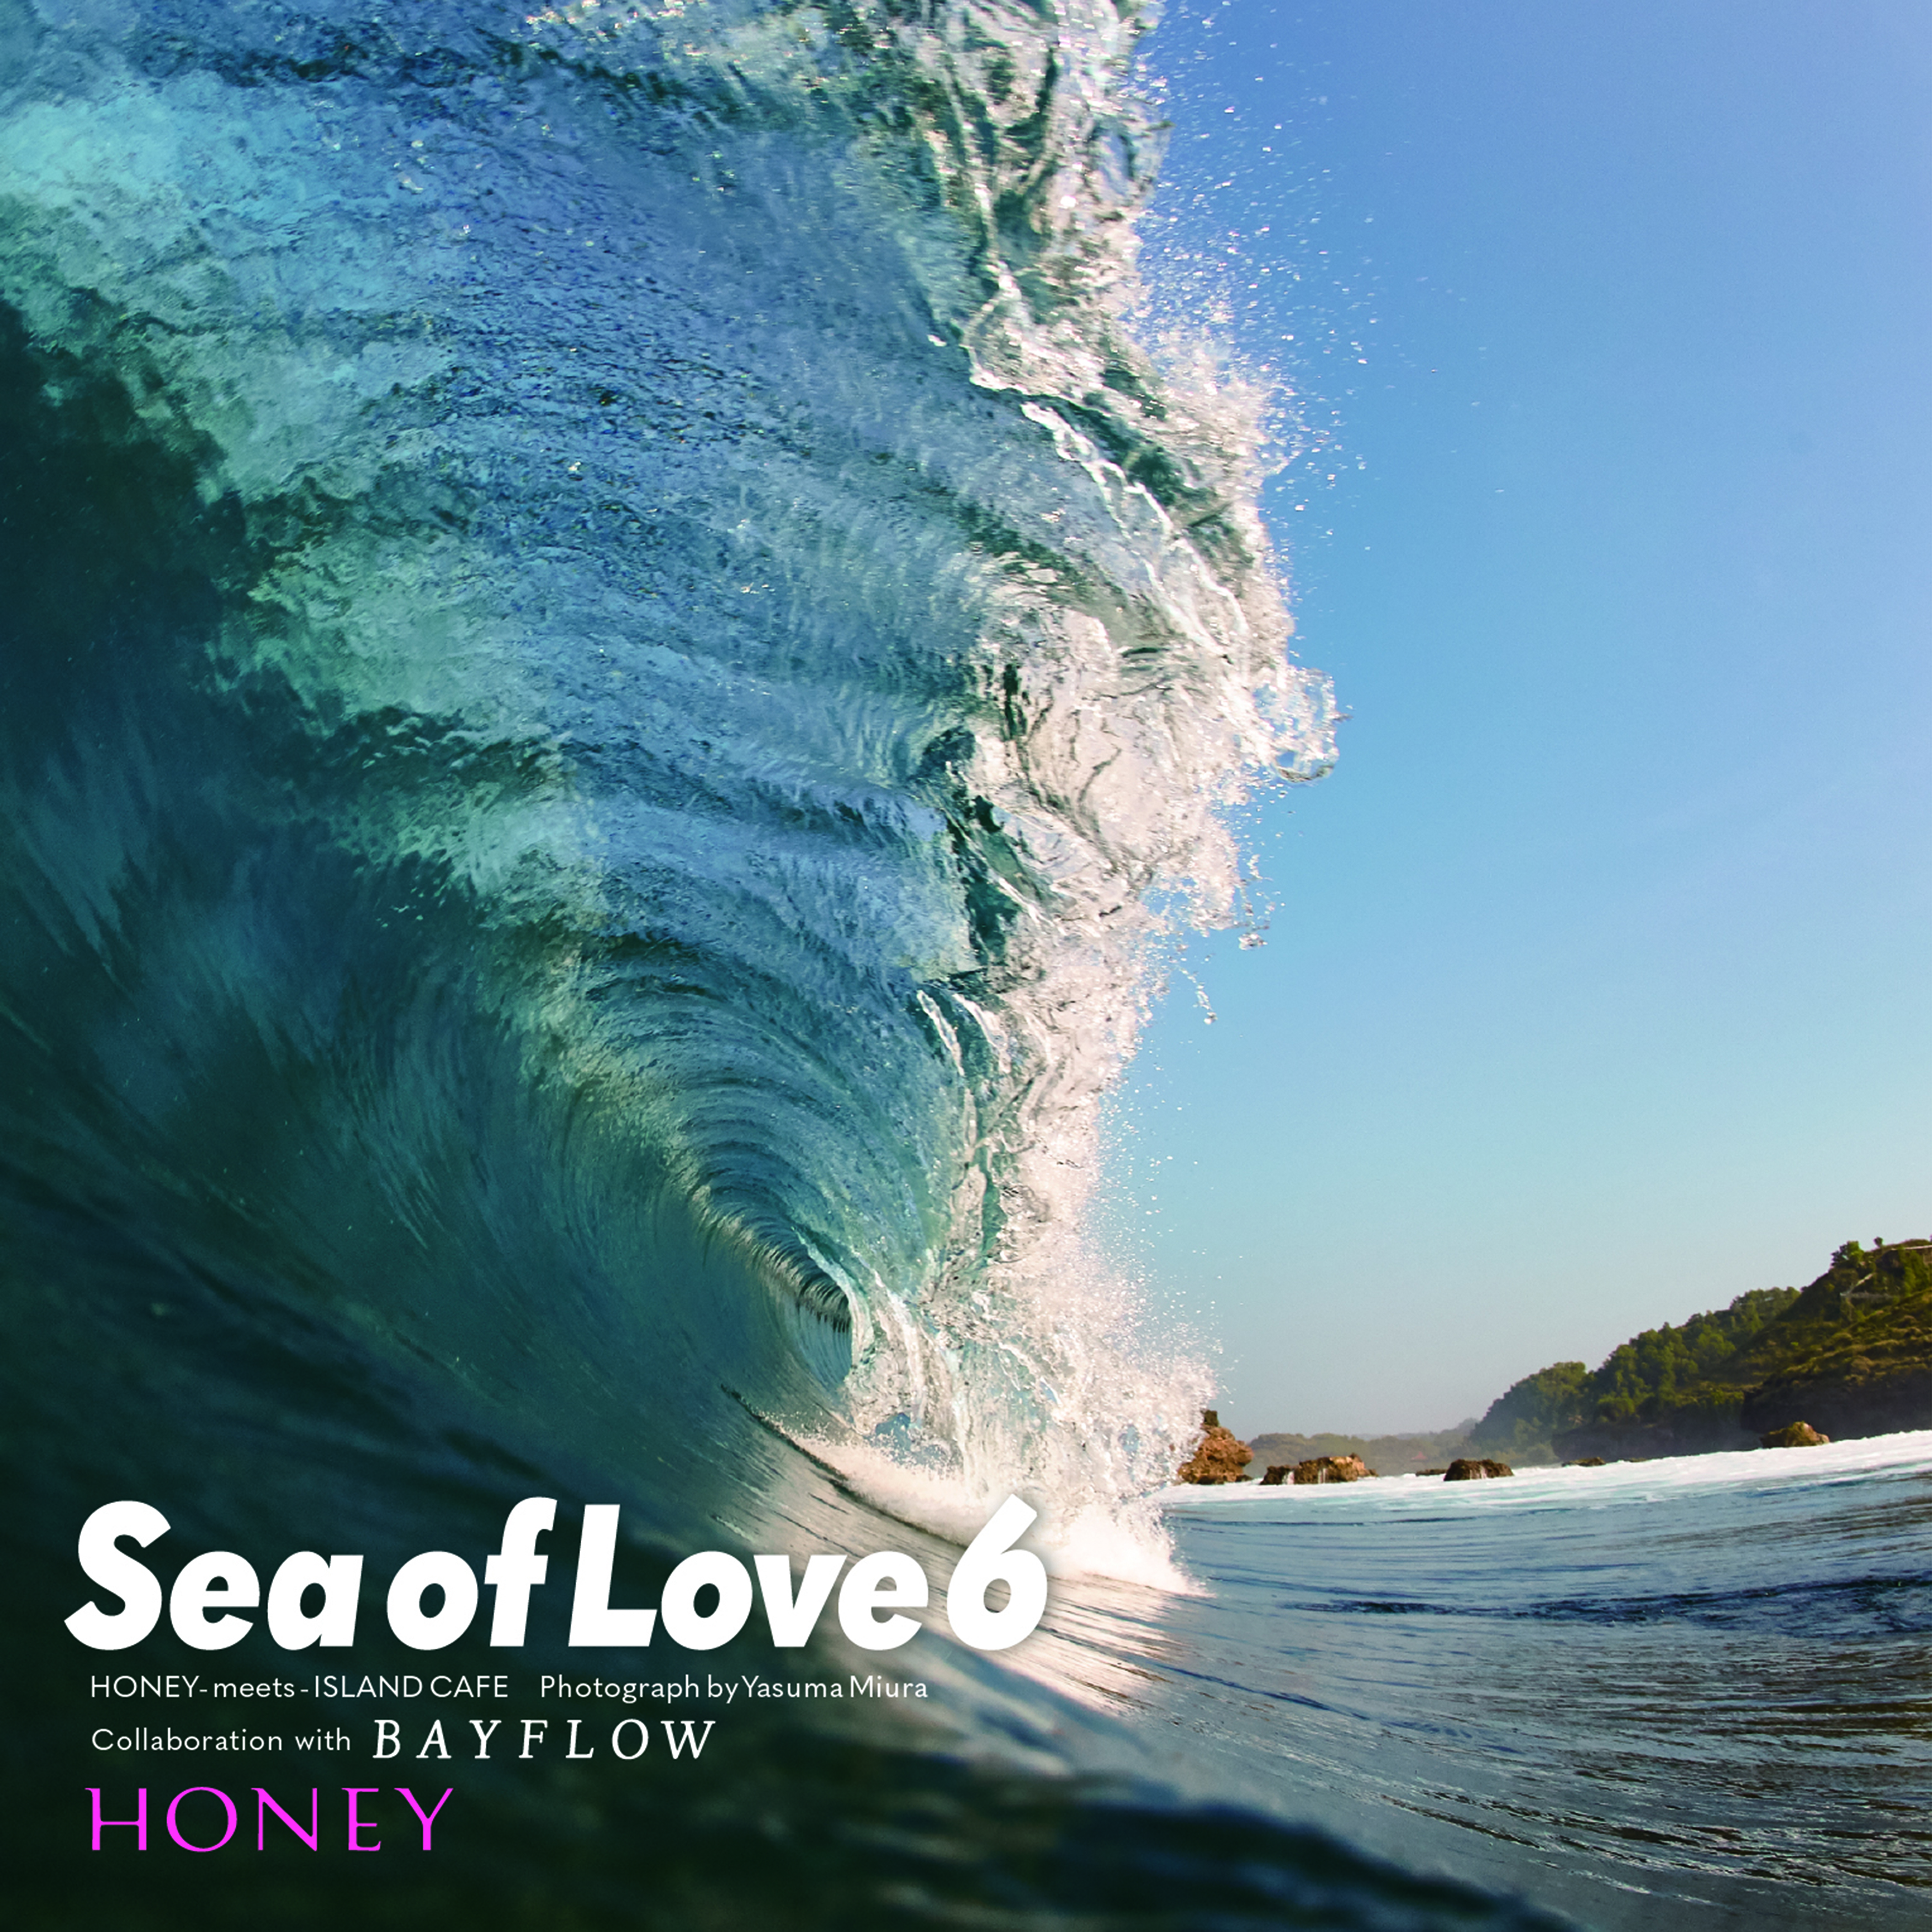 HONEY meets ISLAND CAFE -Sea of Love 6- Collaboration with BAYFLOW